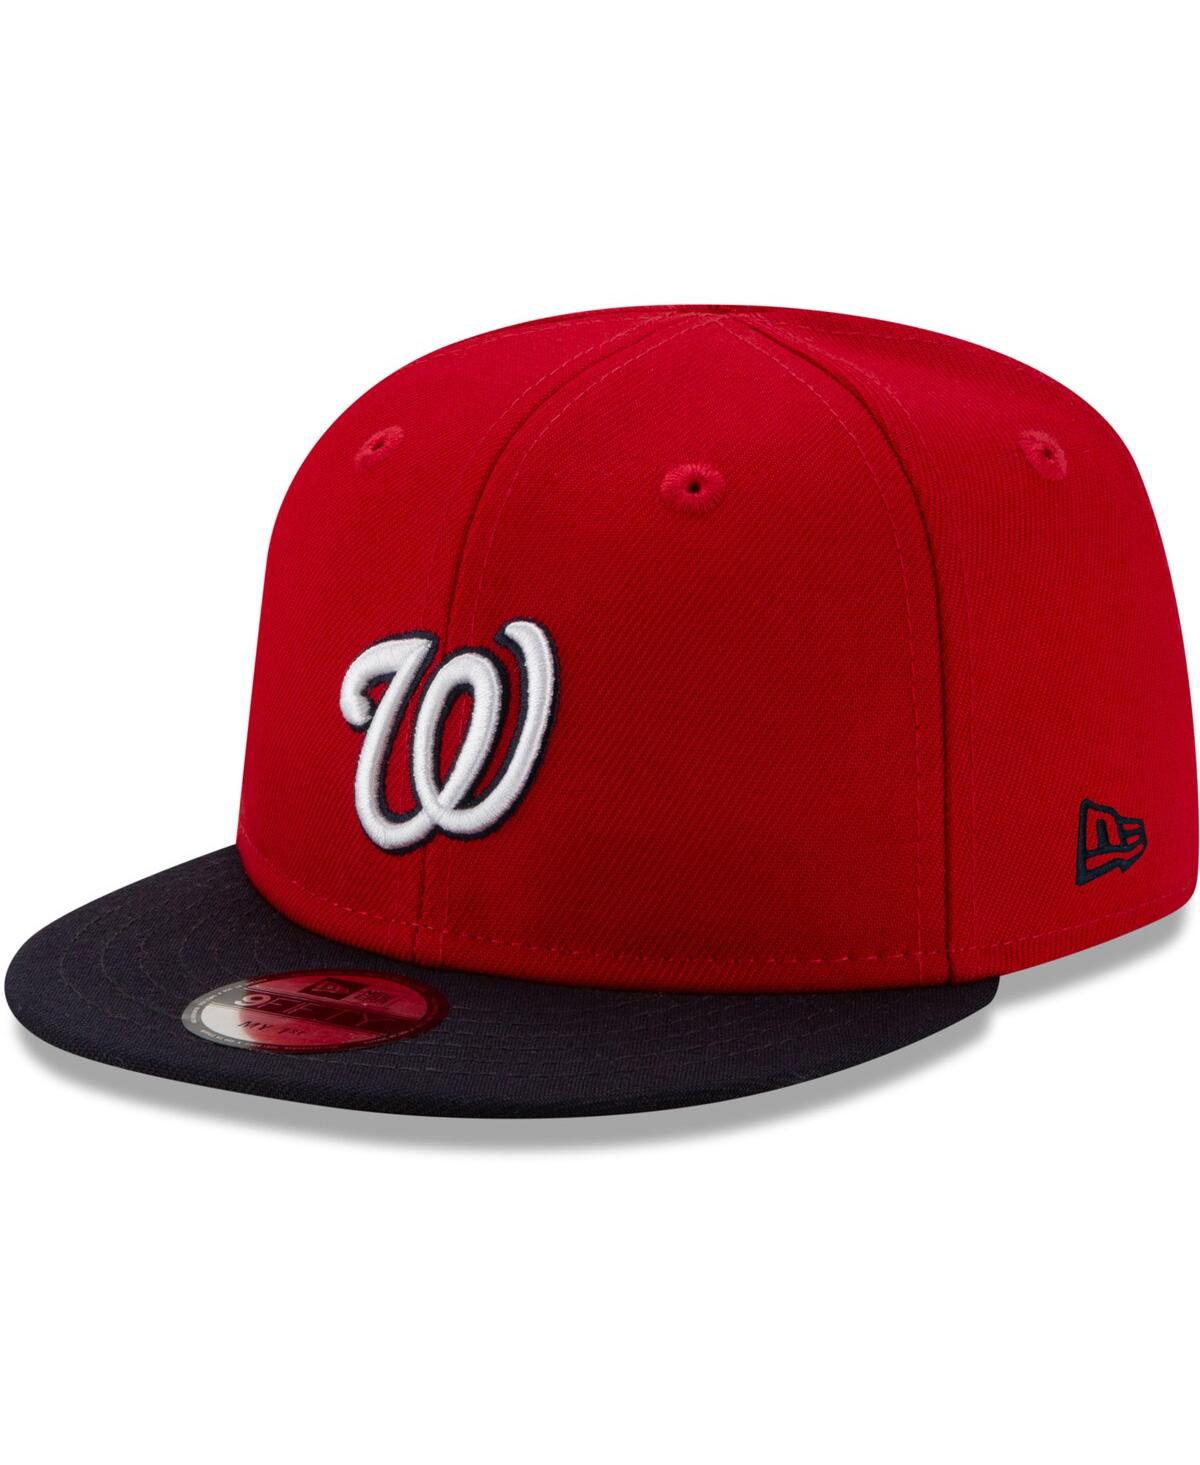 Shop New Era Infant Unisex Red Washington Nationals My First 9fifty Hat